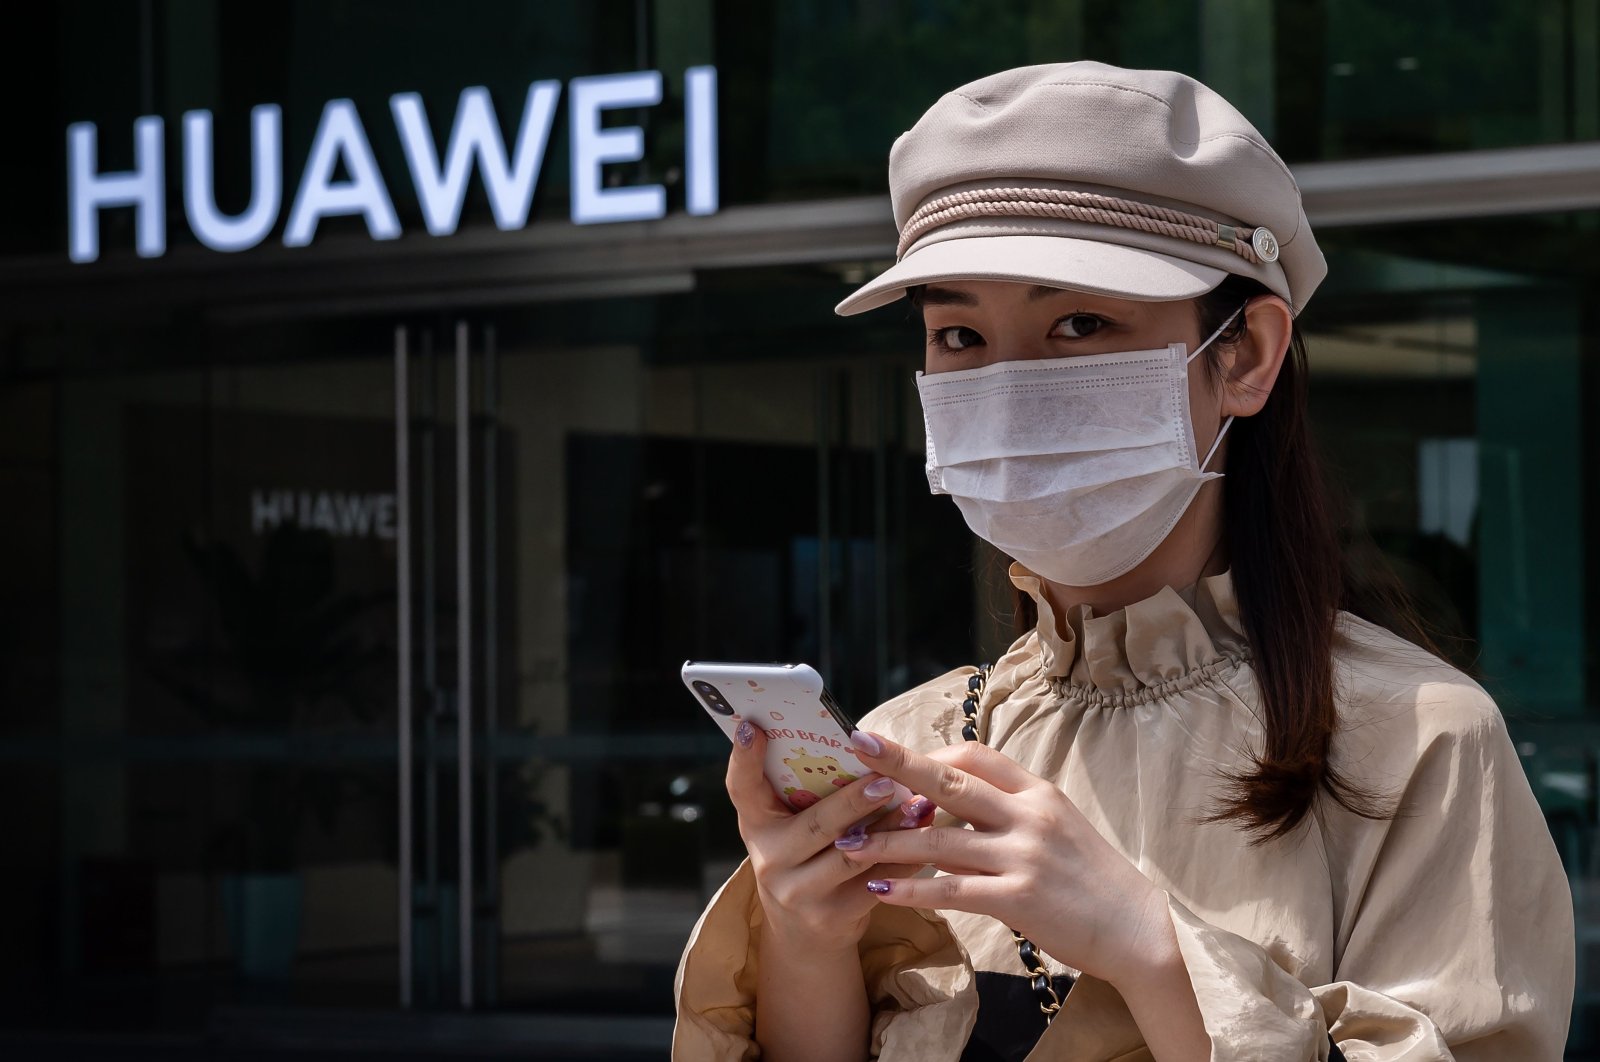 A woman walks past a shop for Chinese telecoms giant Huawei in Beijing, China, May 25, 2020. (AFP Photo)